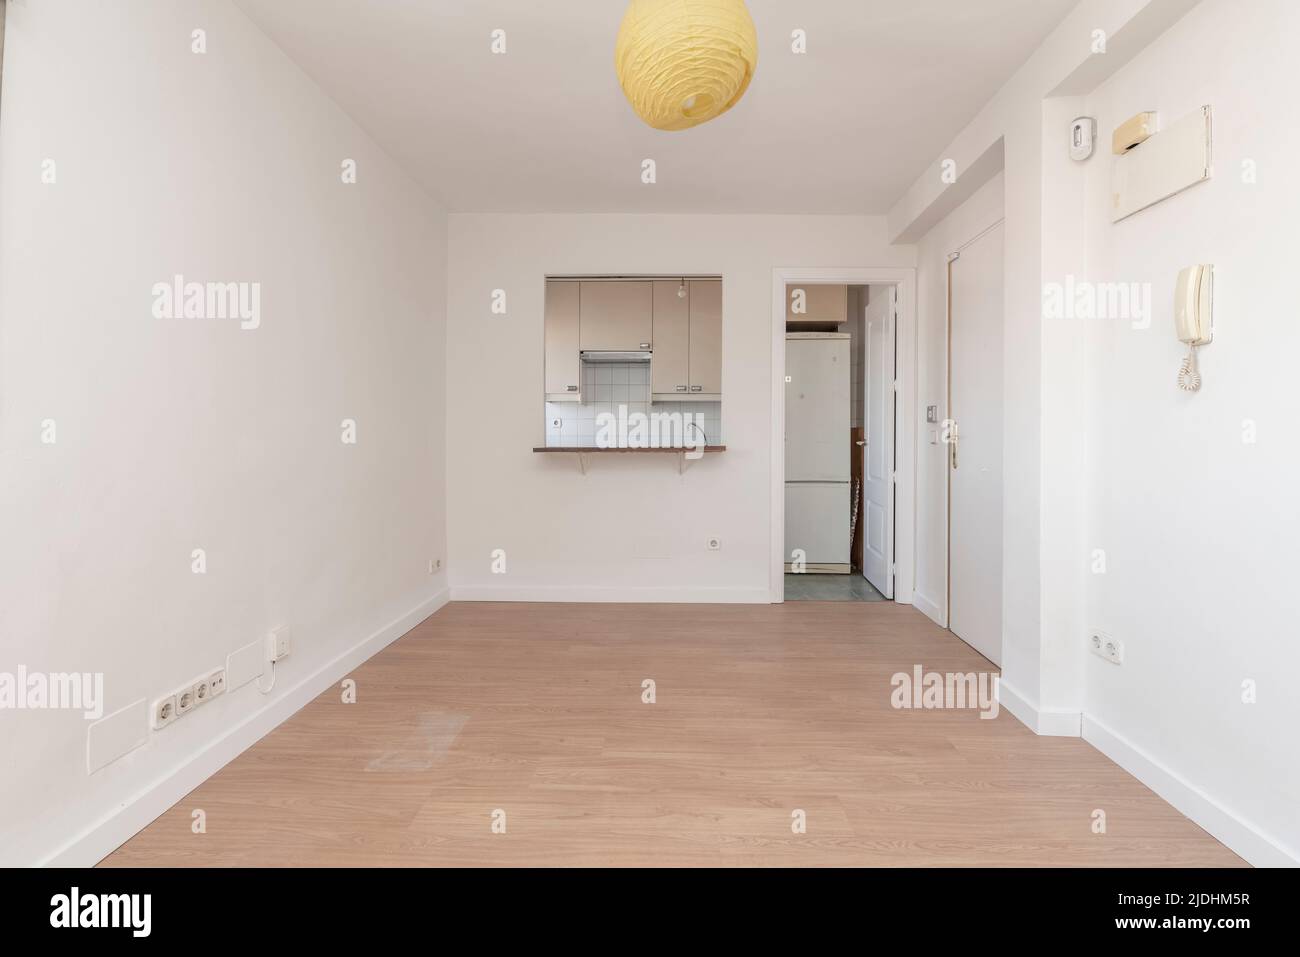 Empty living room with oak parquet floor, plain white painted walls and serving hatch from kitchen Stock Photo